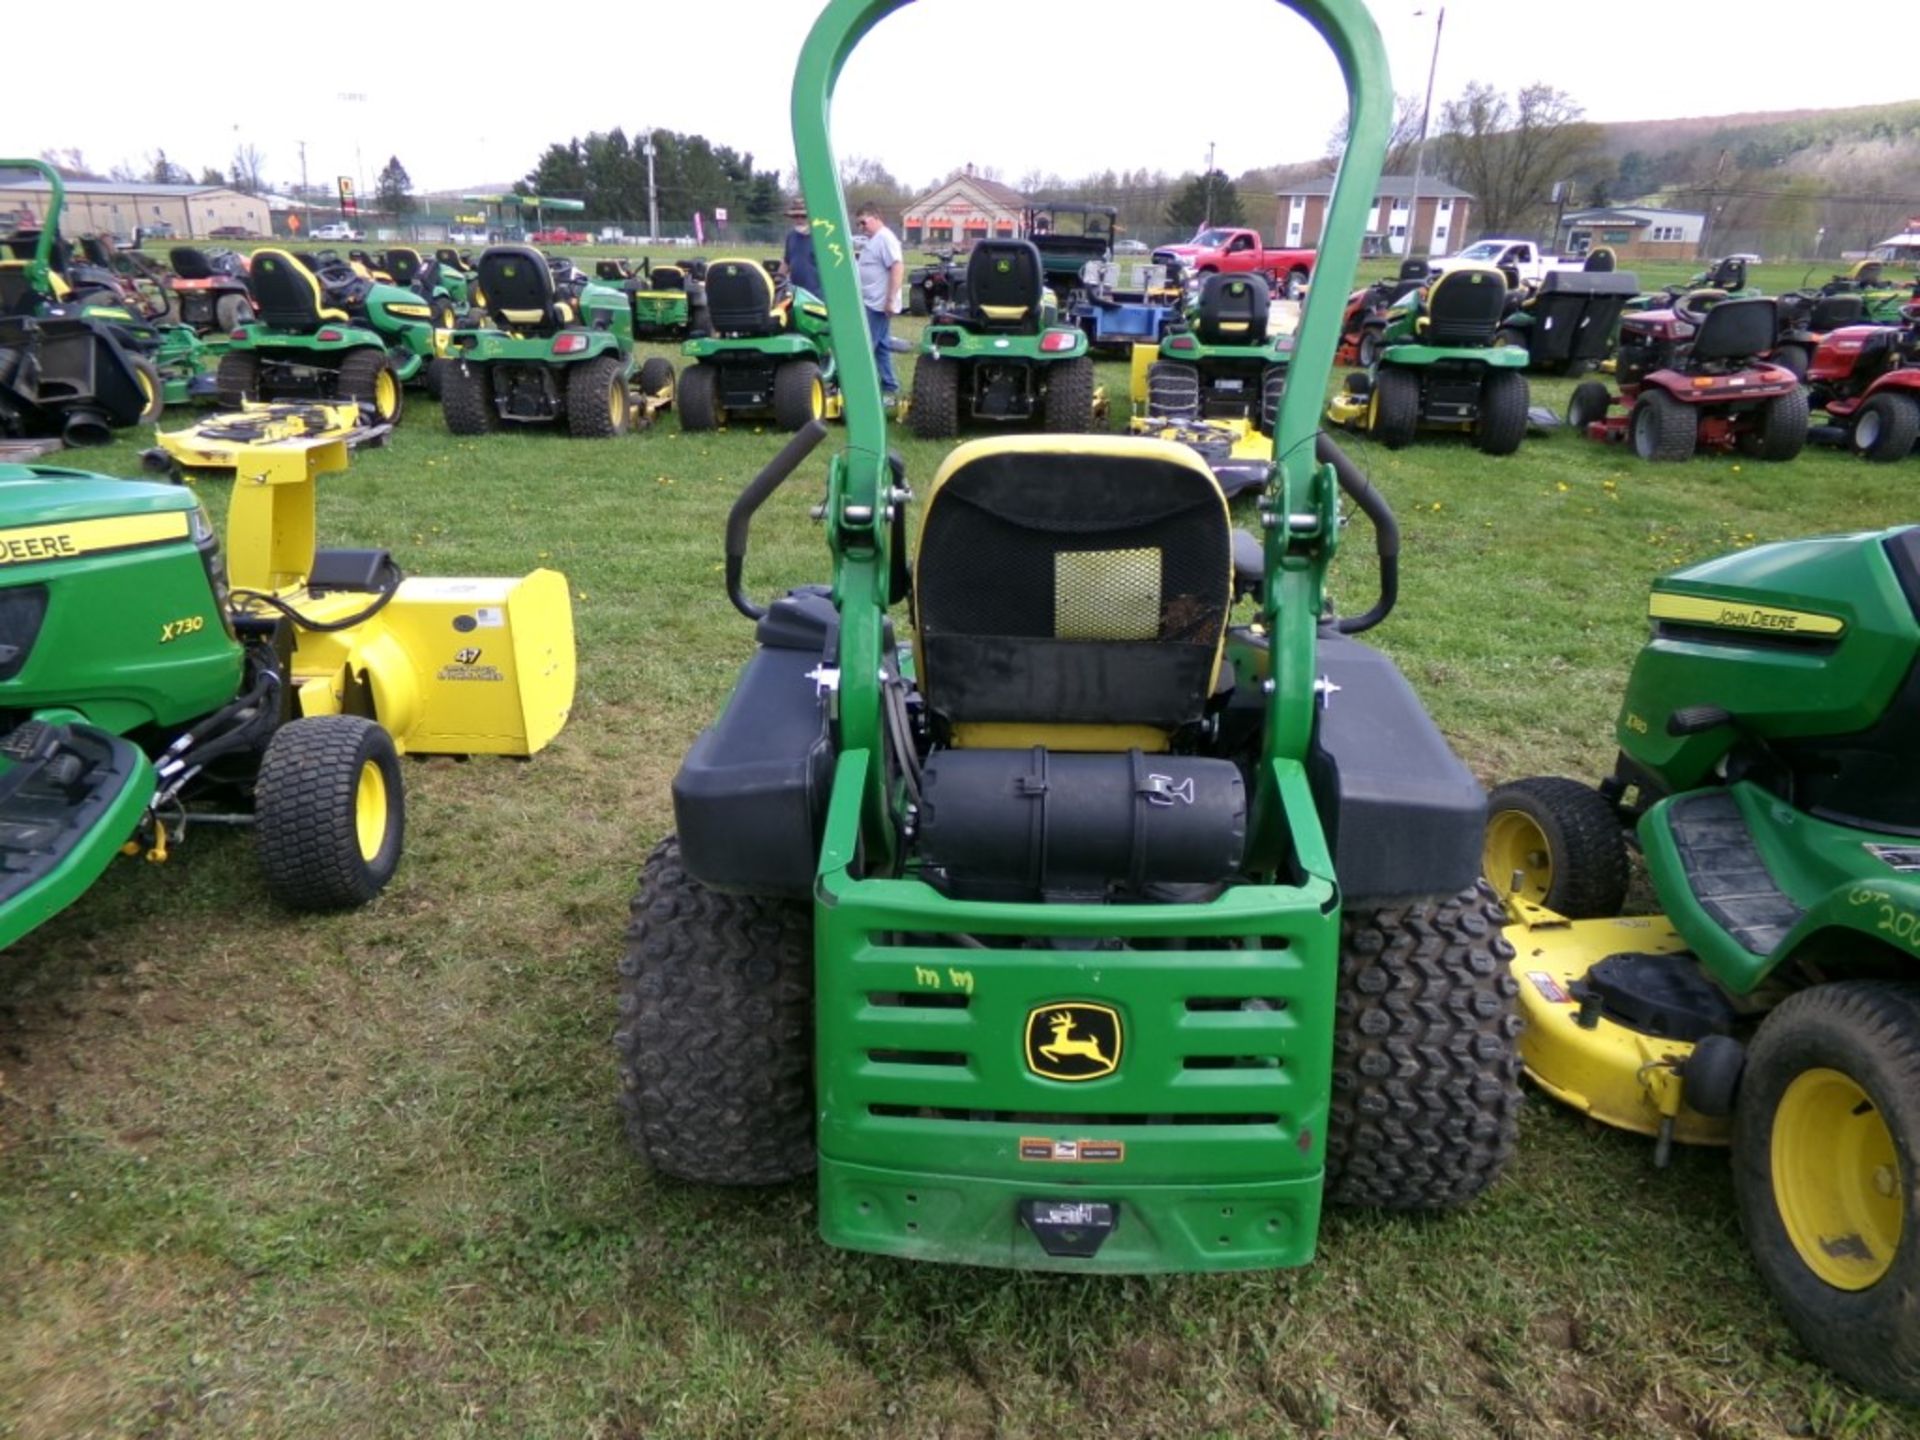 John Deere Z915E Commercial Zero Turn Mower with 54'' 7 Iron Deck, ROPS, 25 HP, 731 Hrs.(5128) - Image 3 of 3